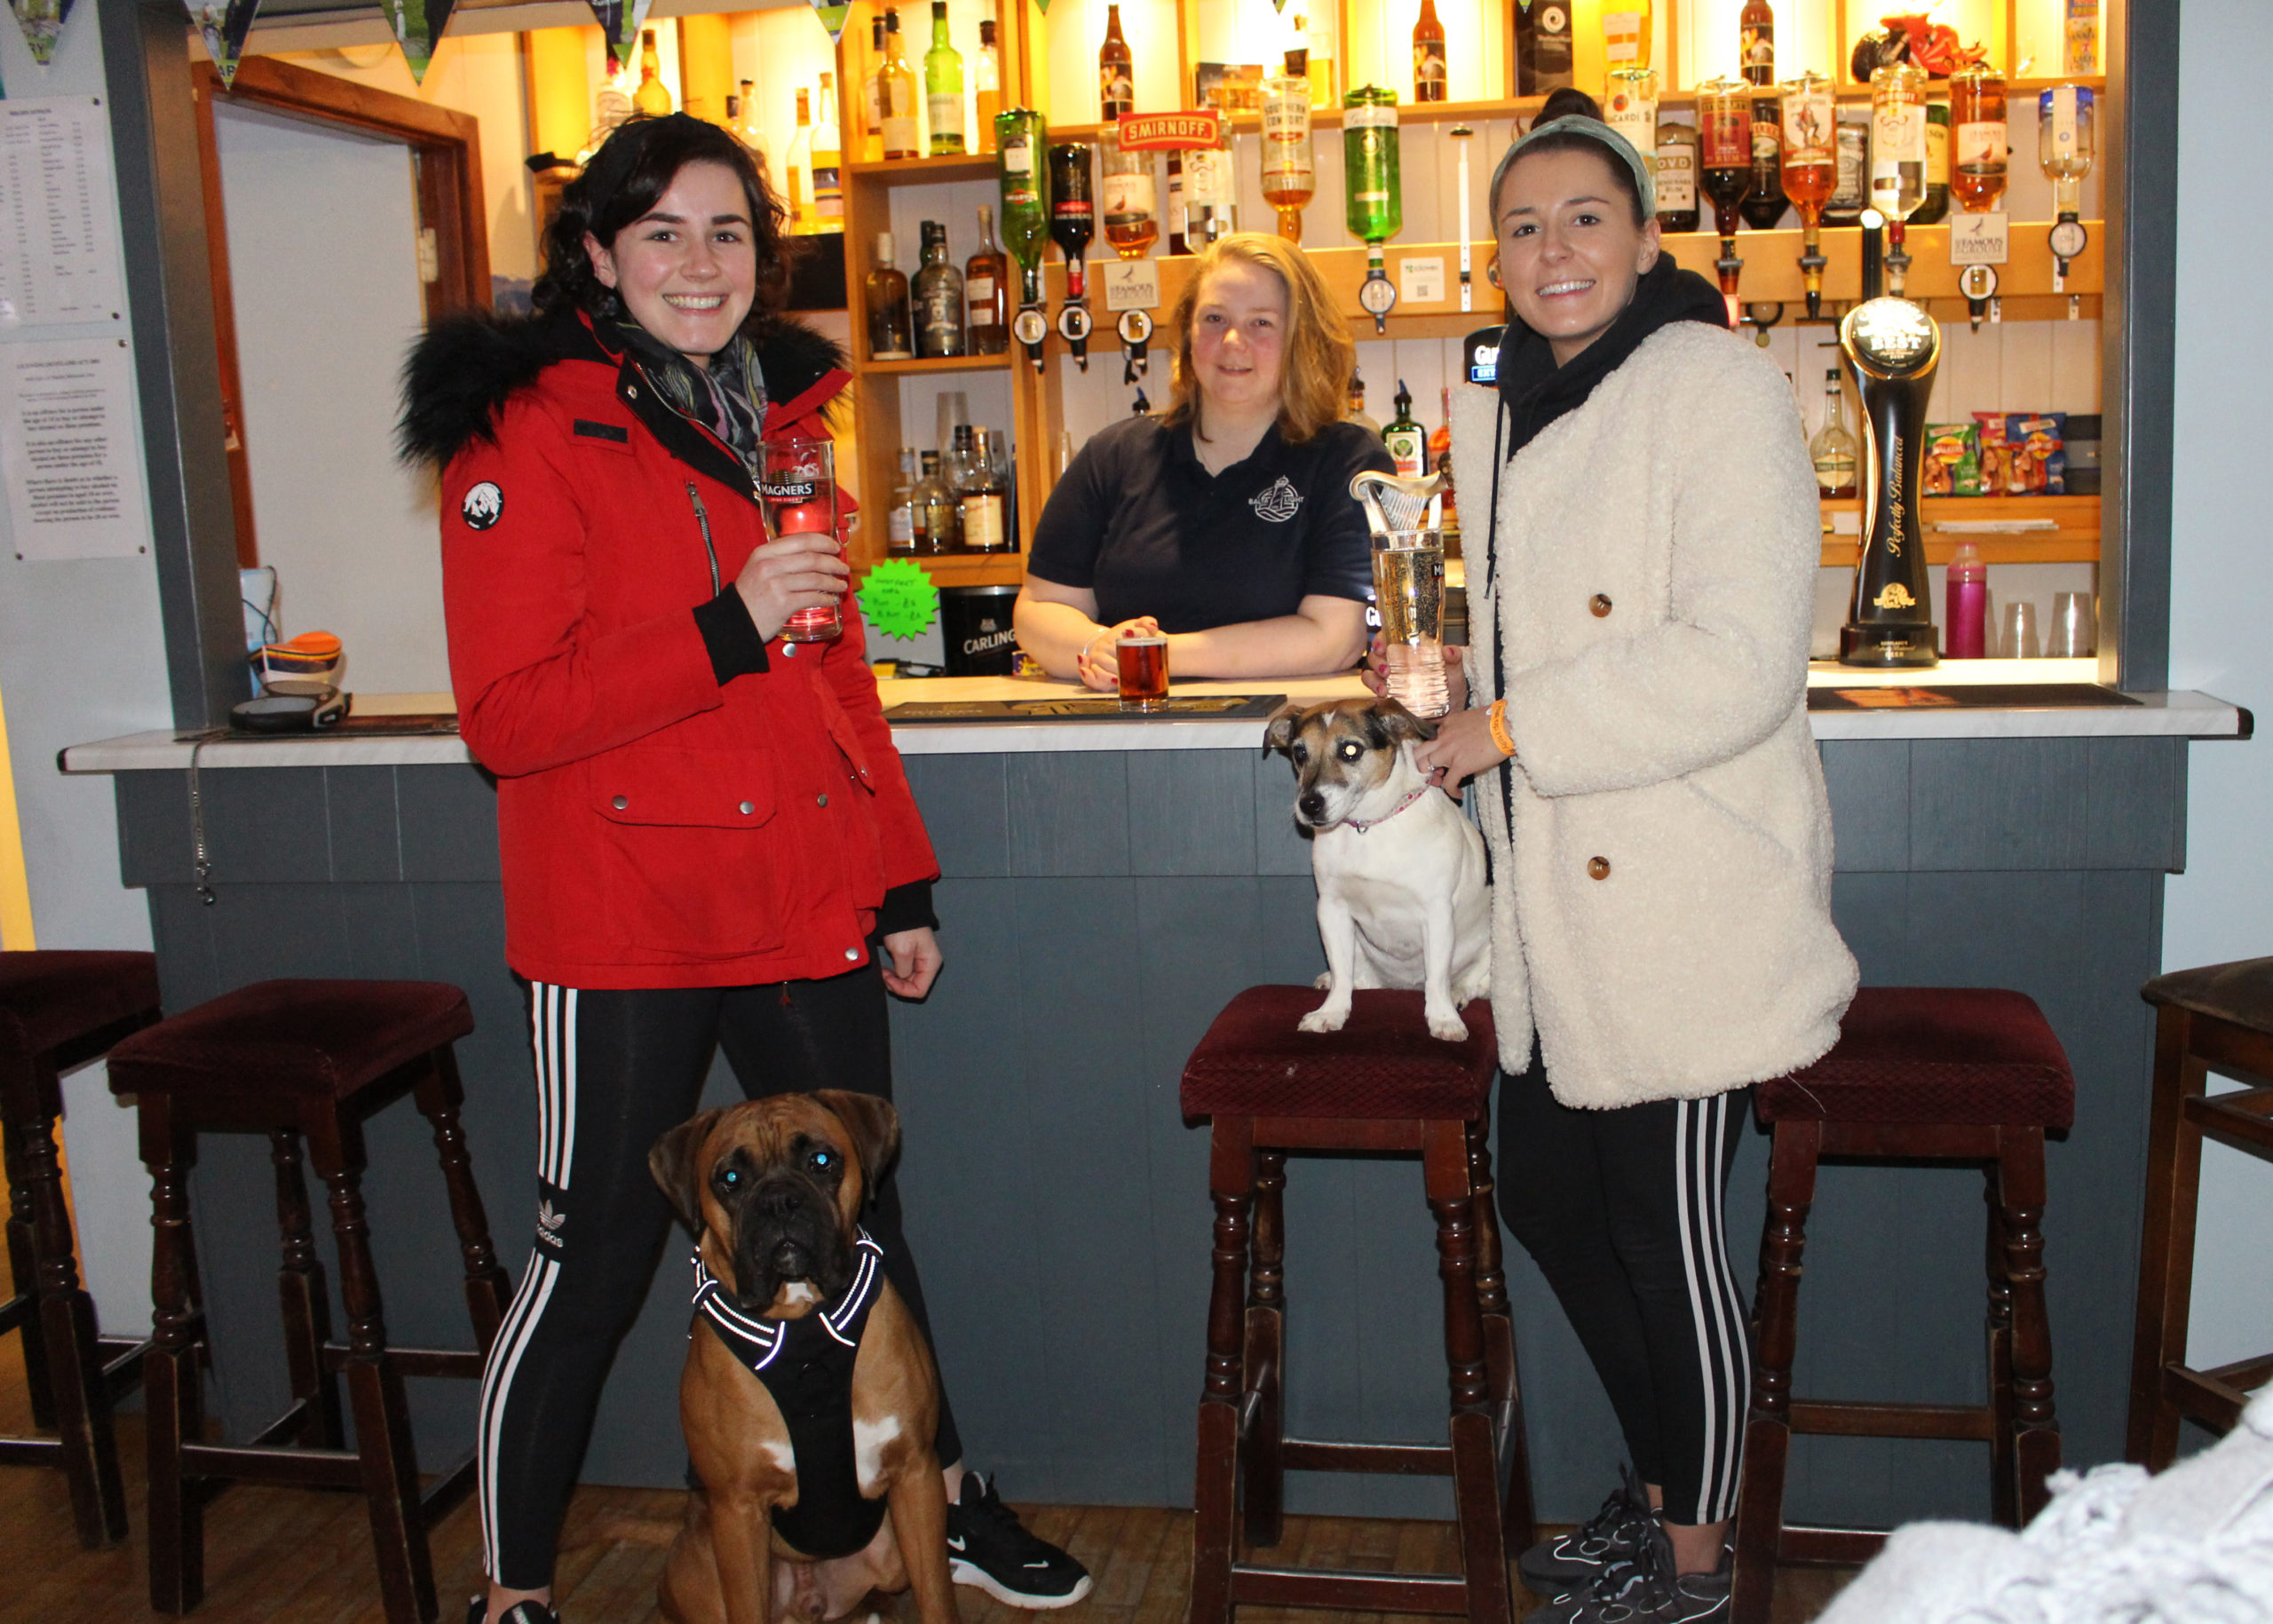 Karis and Megan Burns with barperson Yvonne Anderson at Balta Light Pub in Unst.